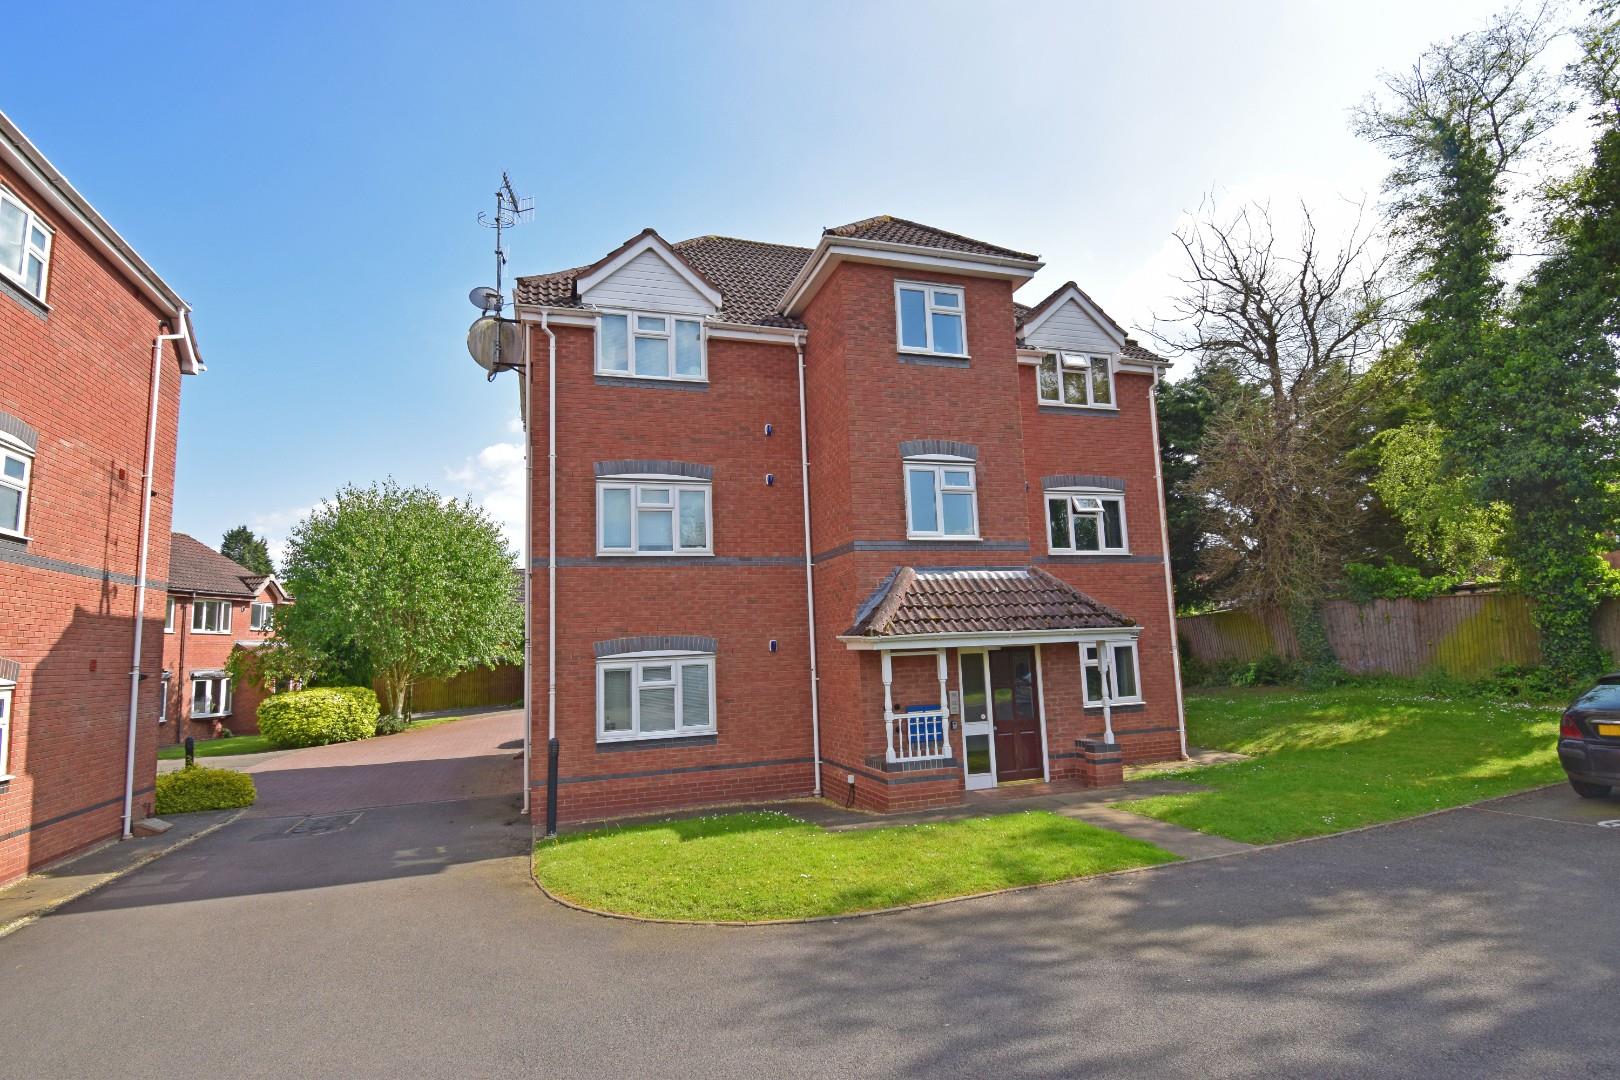 2 Button Drive, Bromsgrove, Worcestershire, B61 8RS